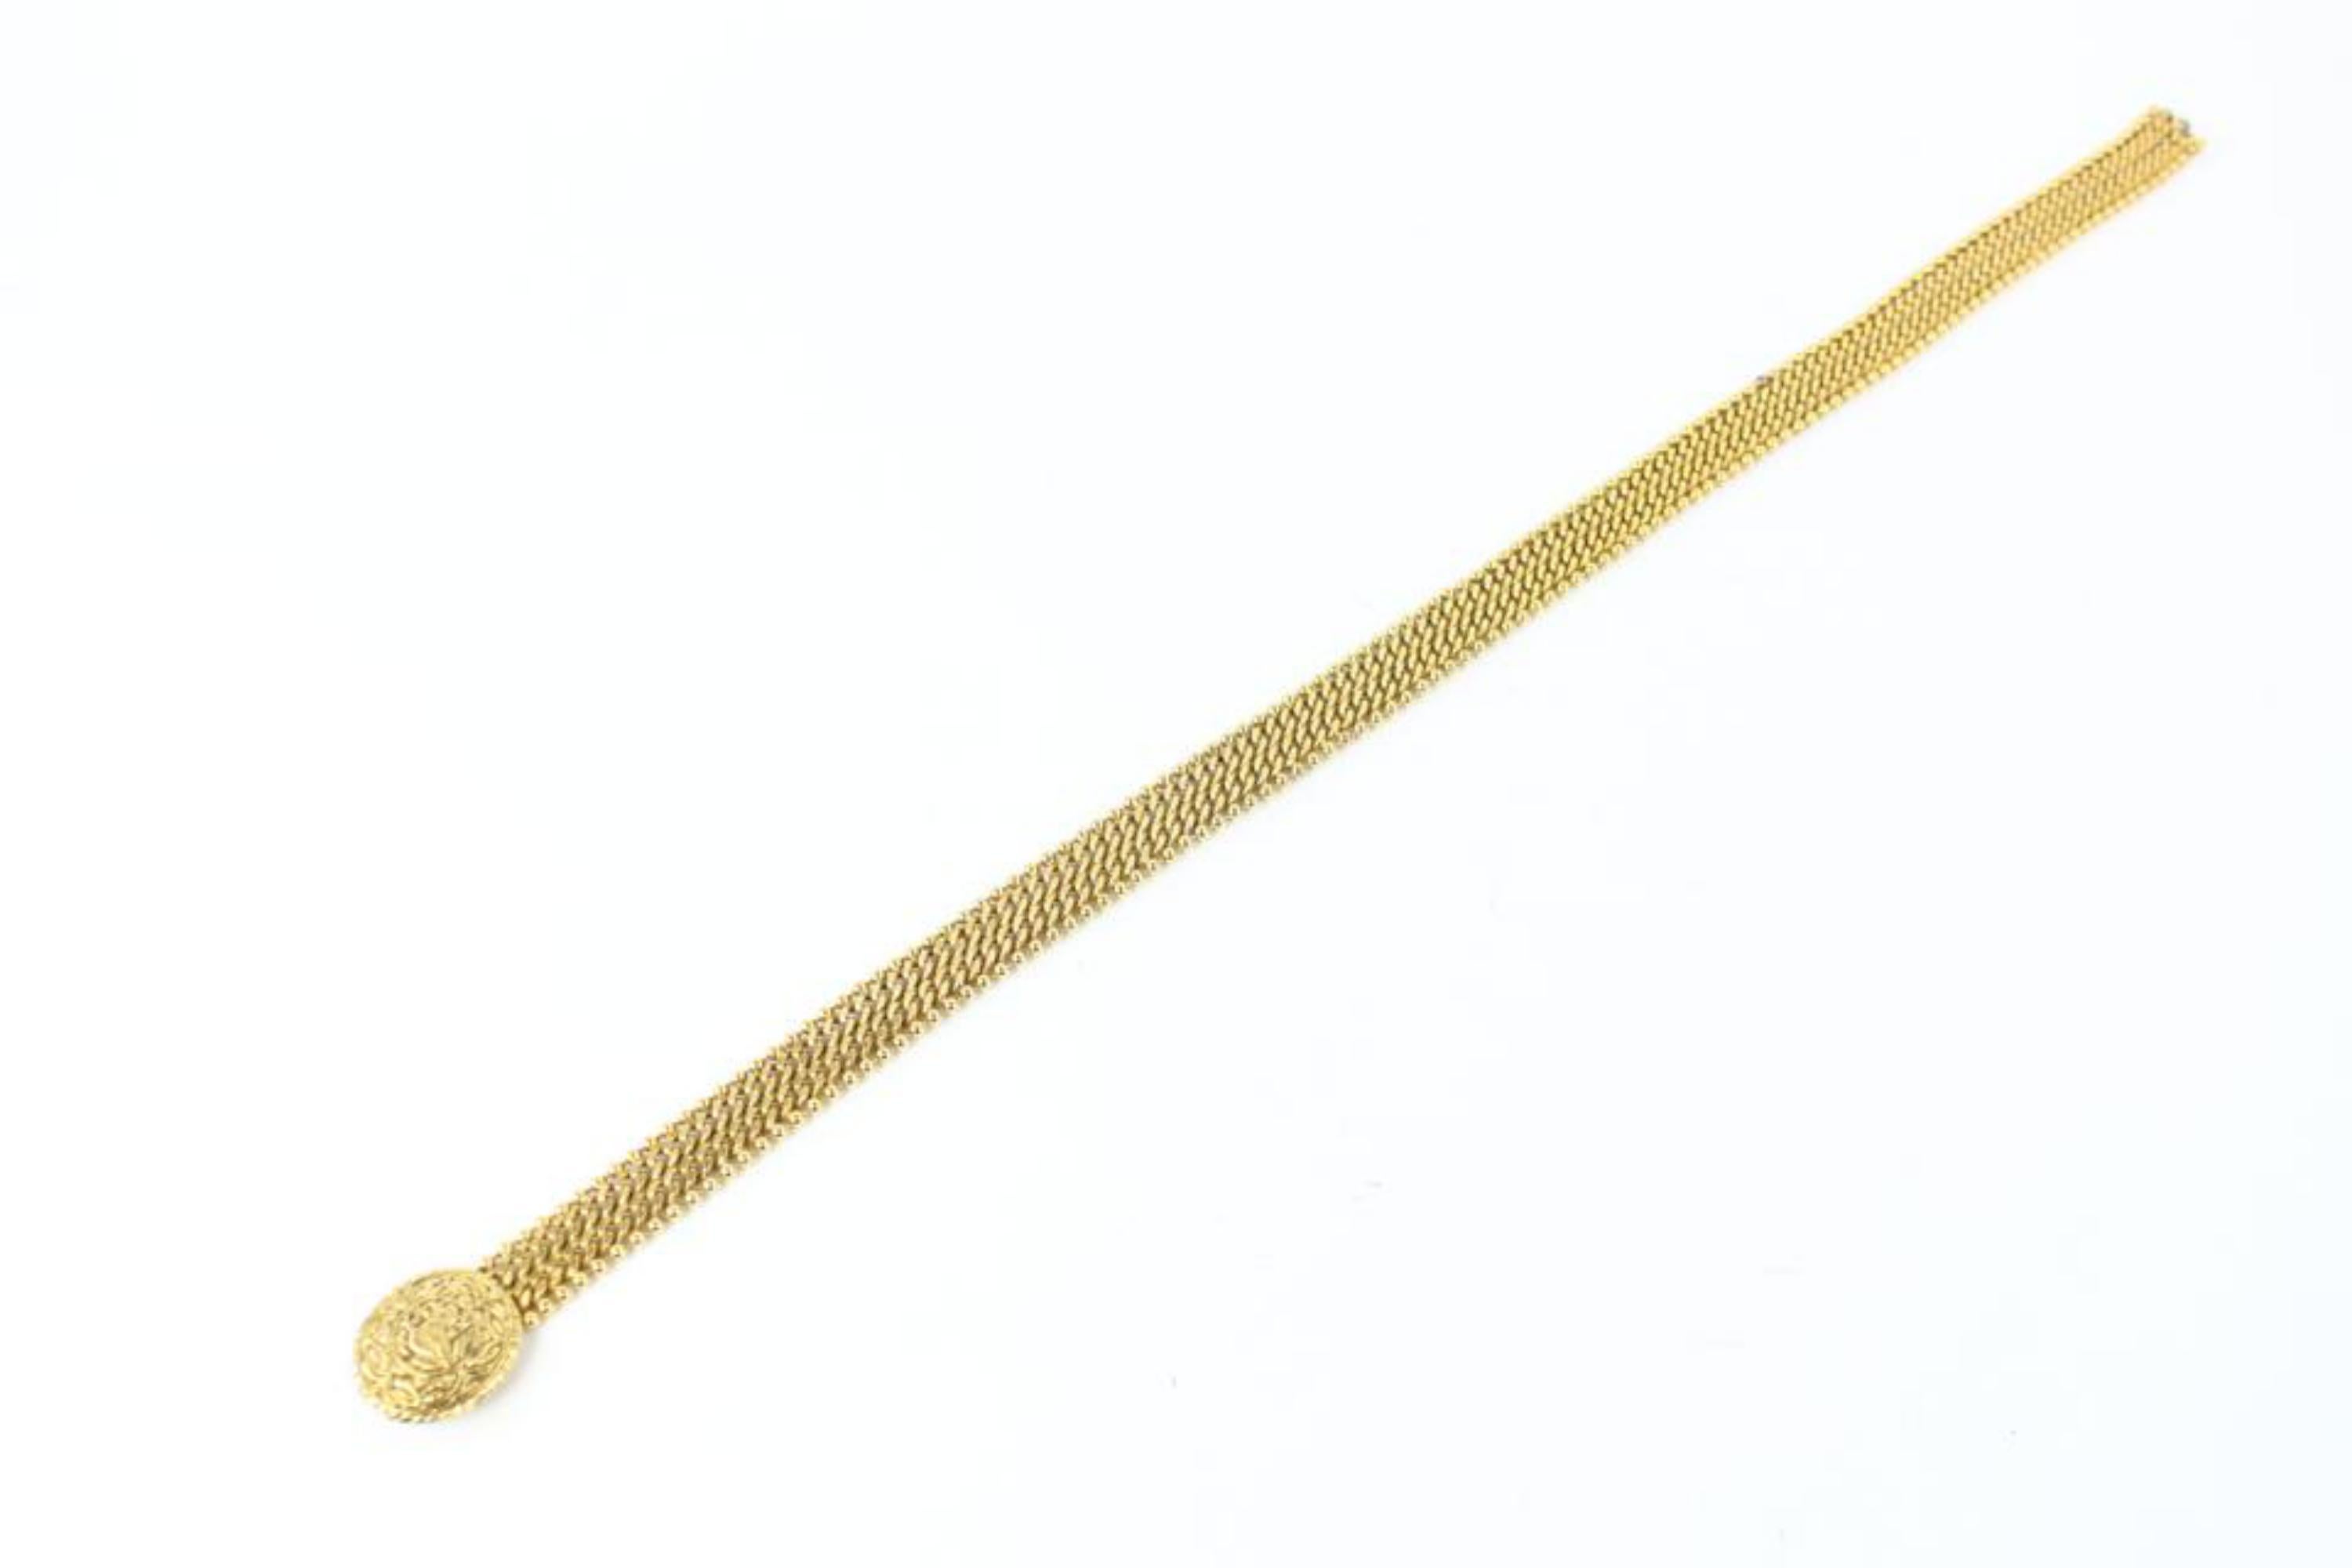 Women's Chanel Gold Chain Or Necklace 2way 18cz0717 Belt For Sale